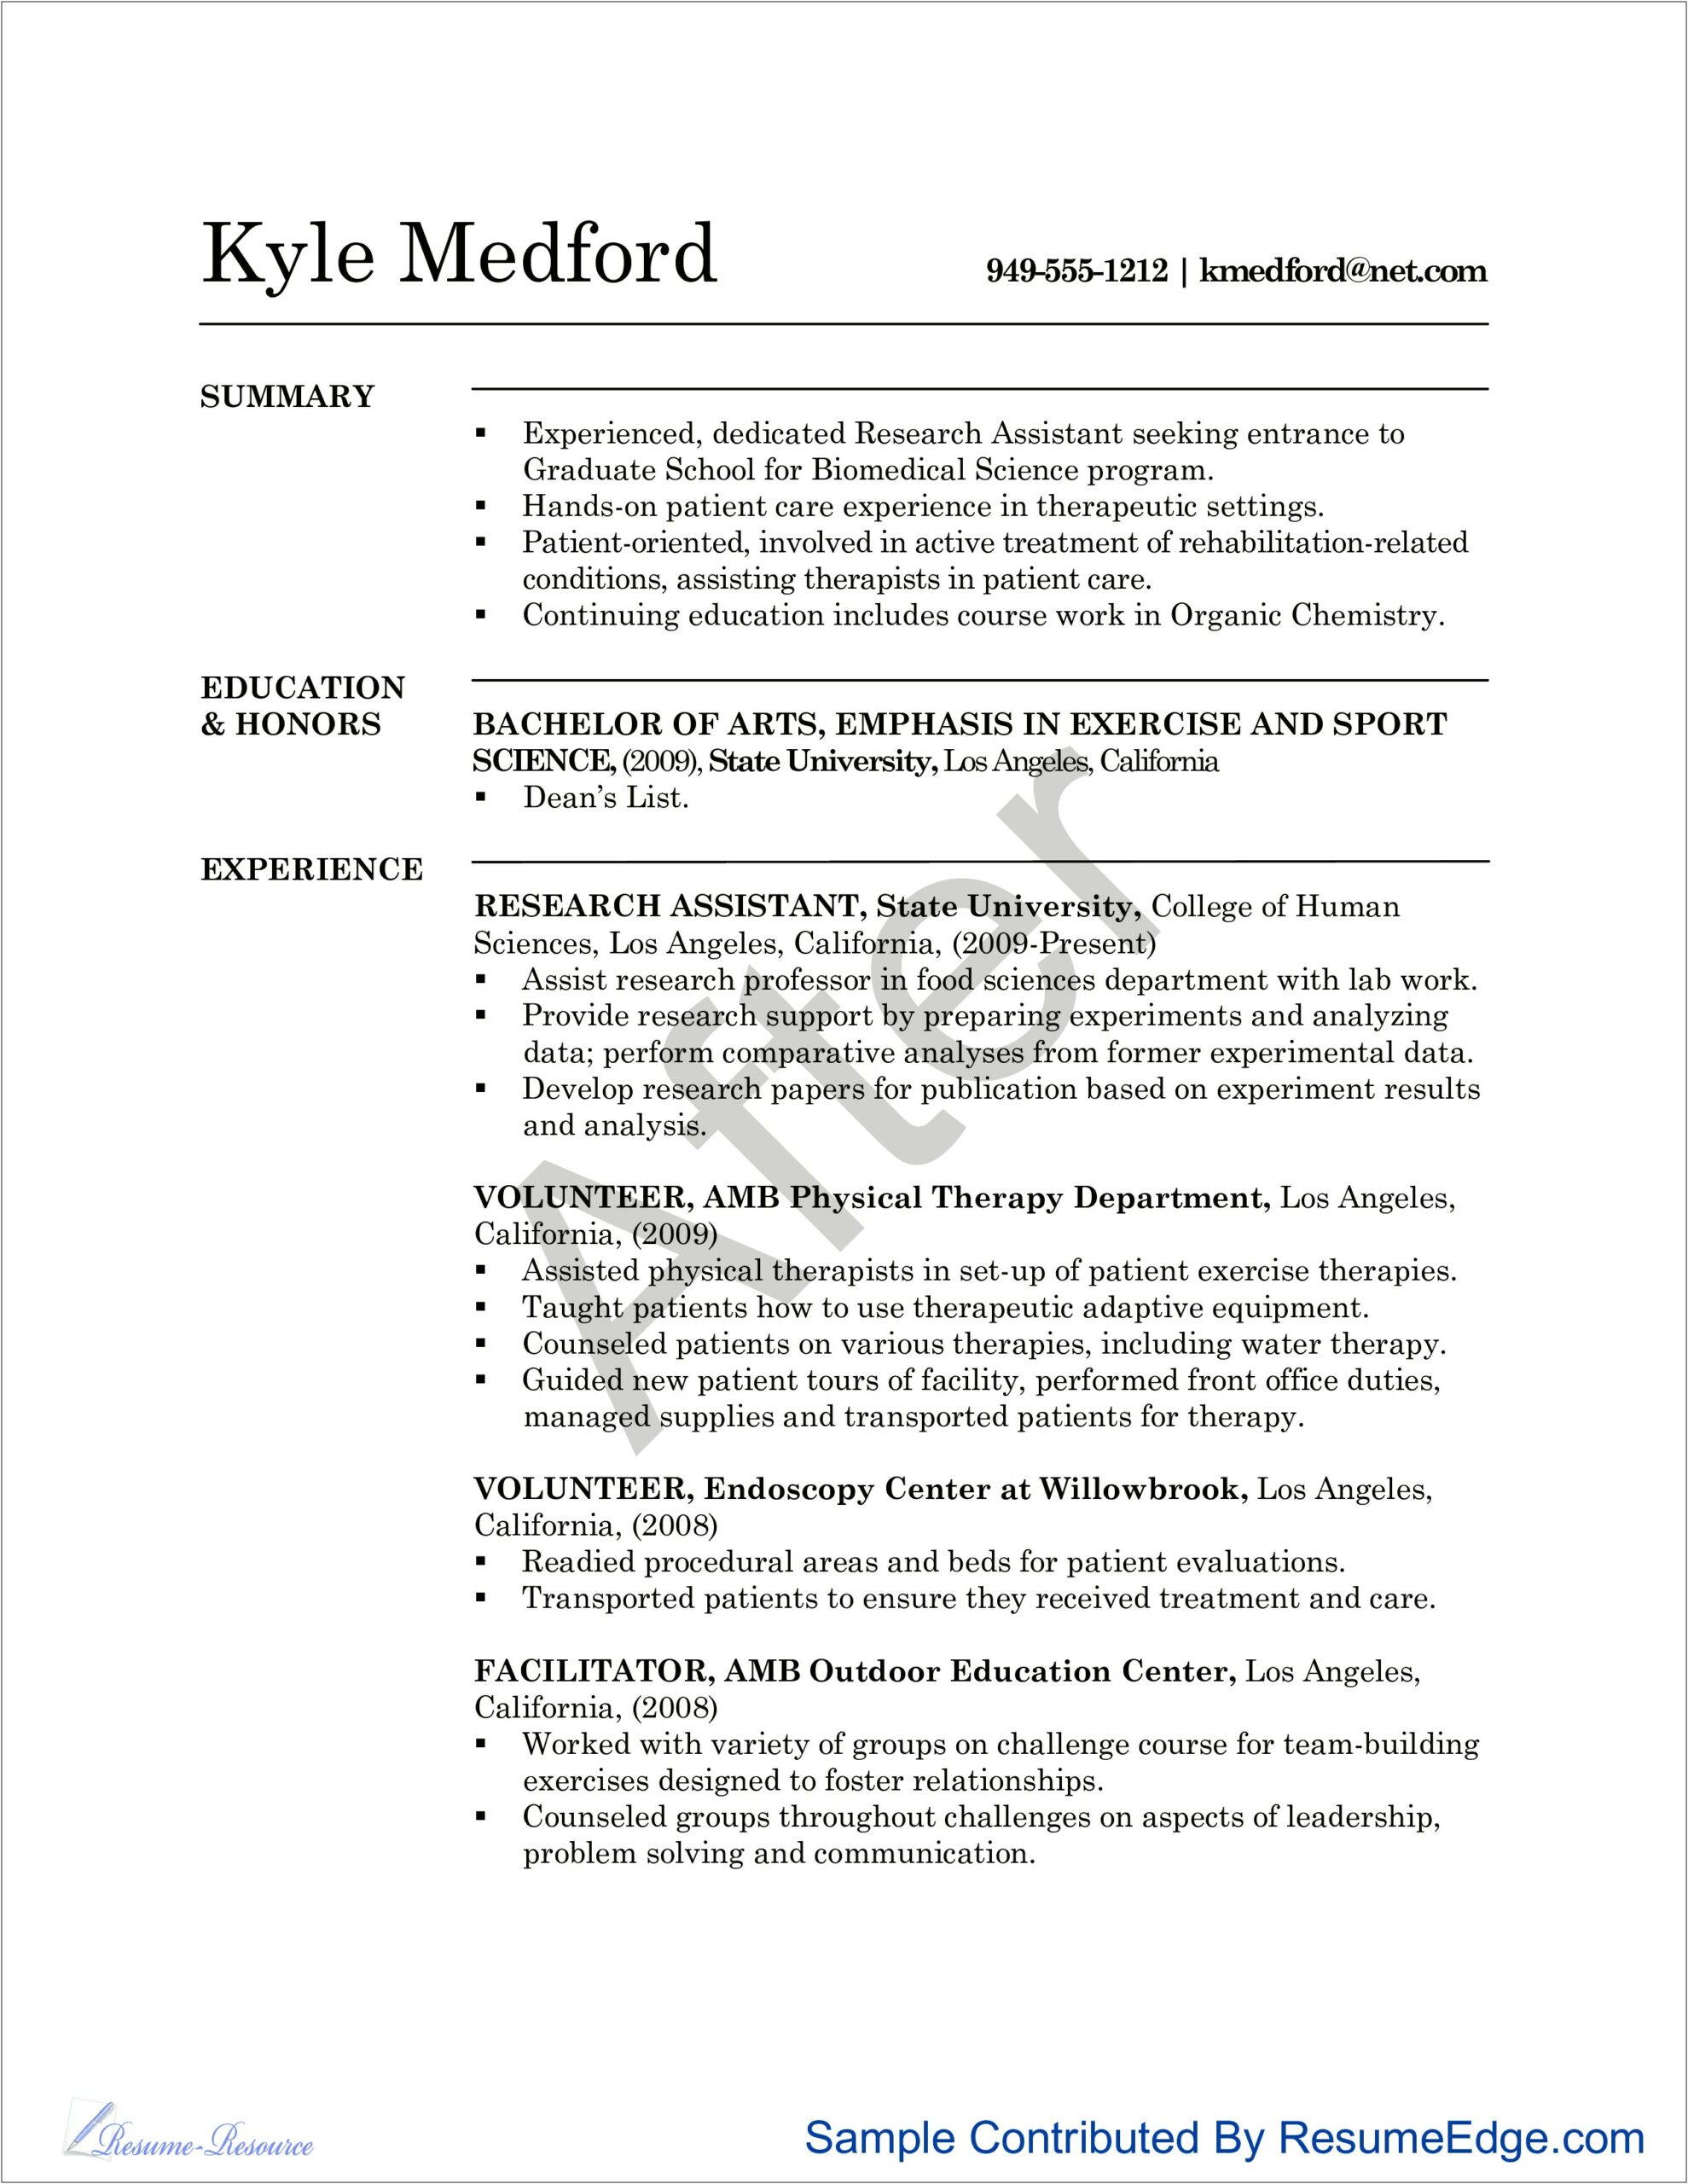 No Work Experience Resume For Research Assistant